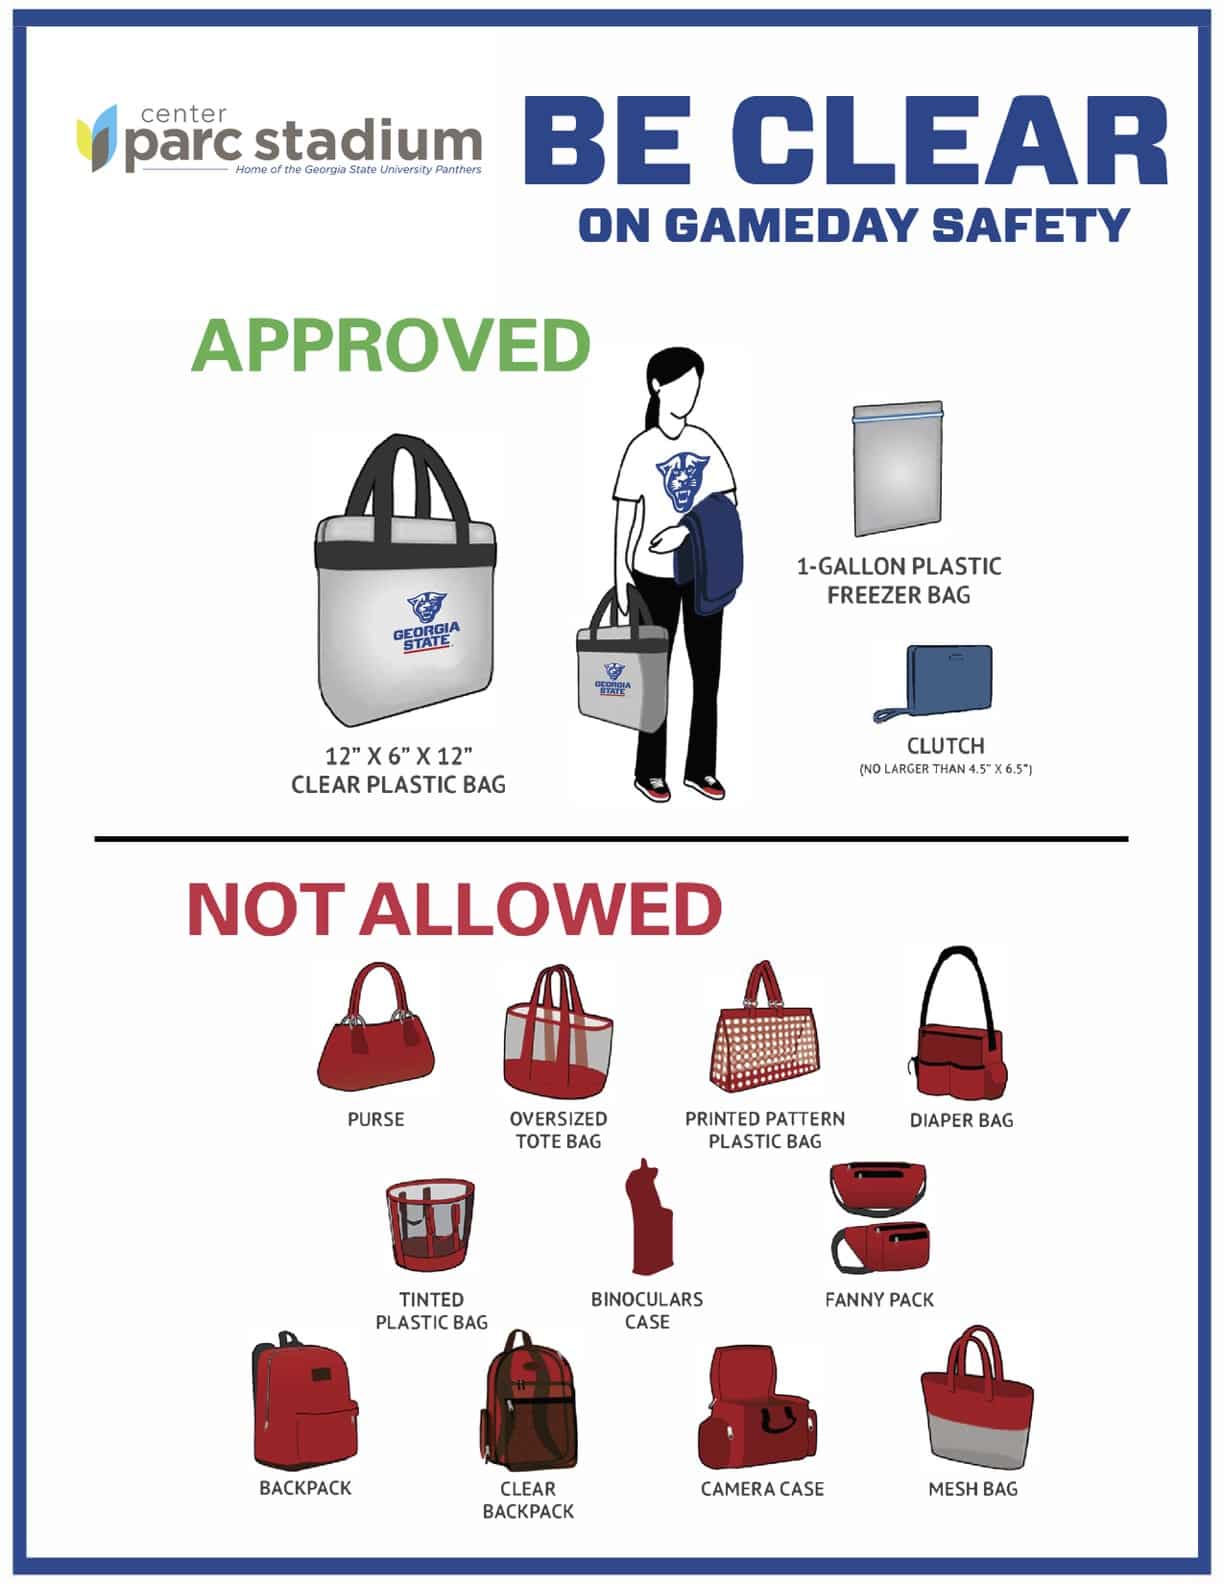 Clear bag policy